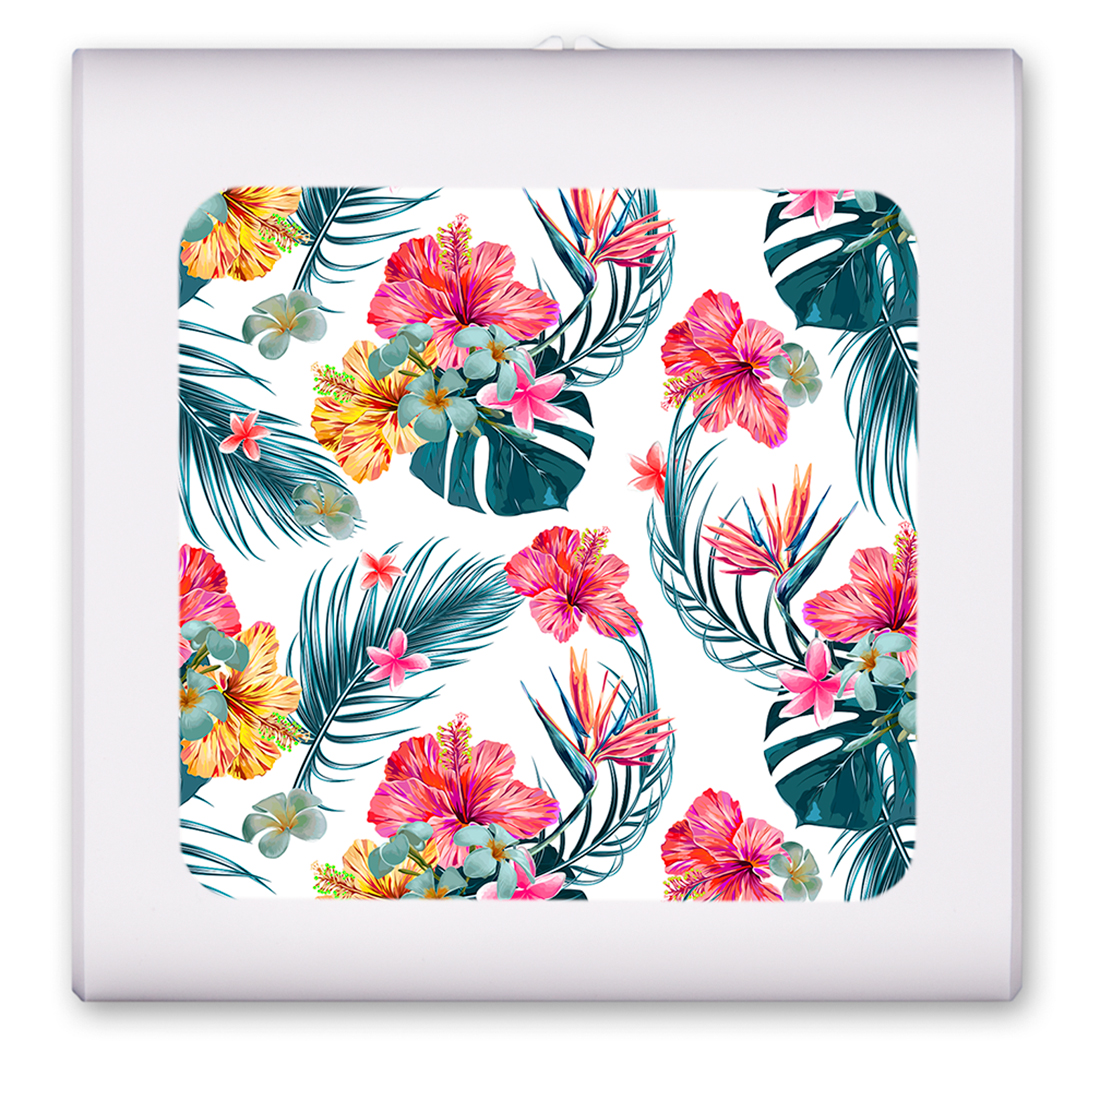 Pink Flowers with Palm Fronds - #2953